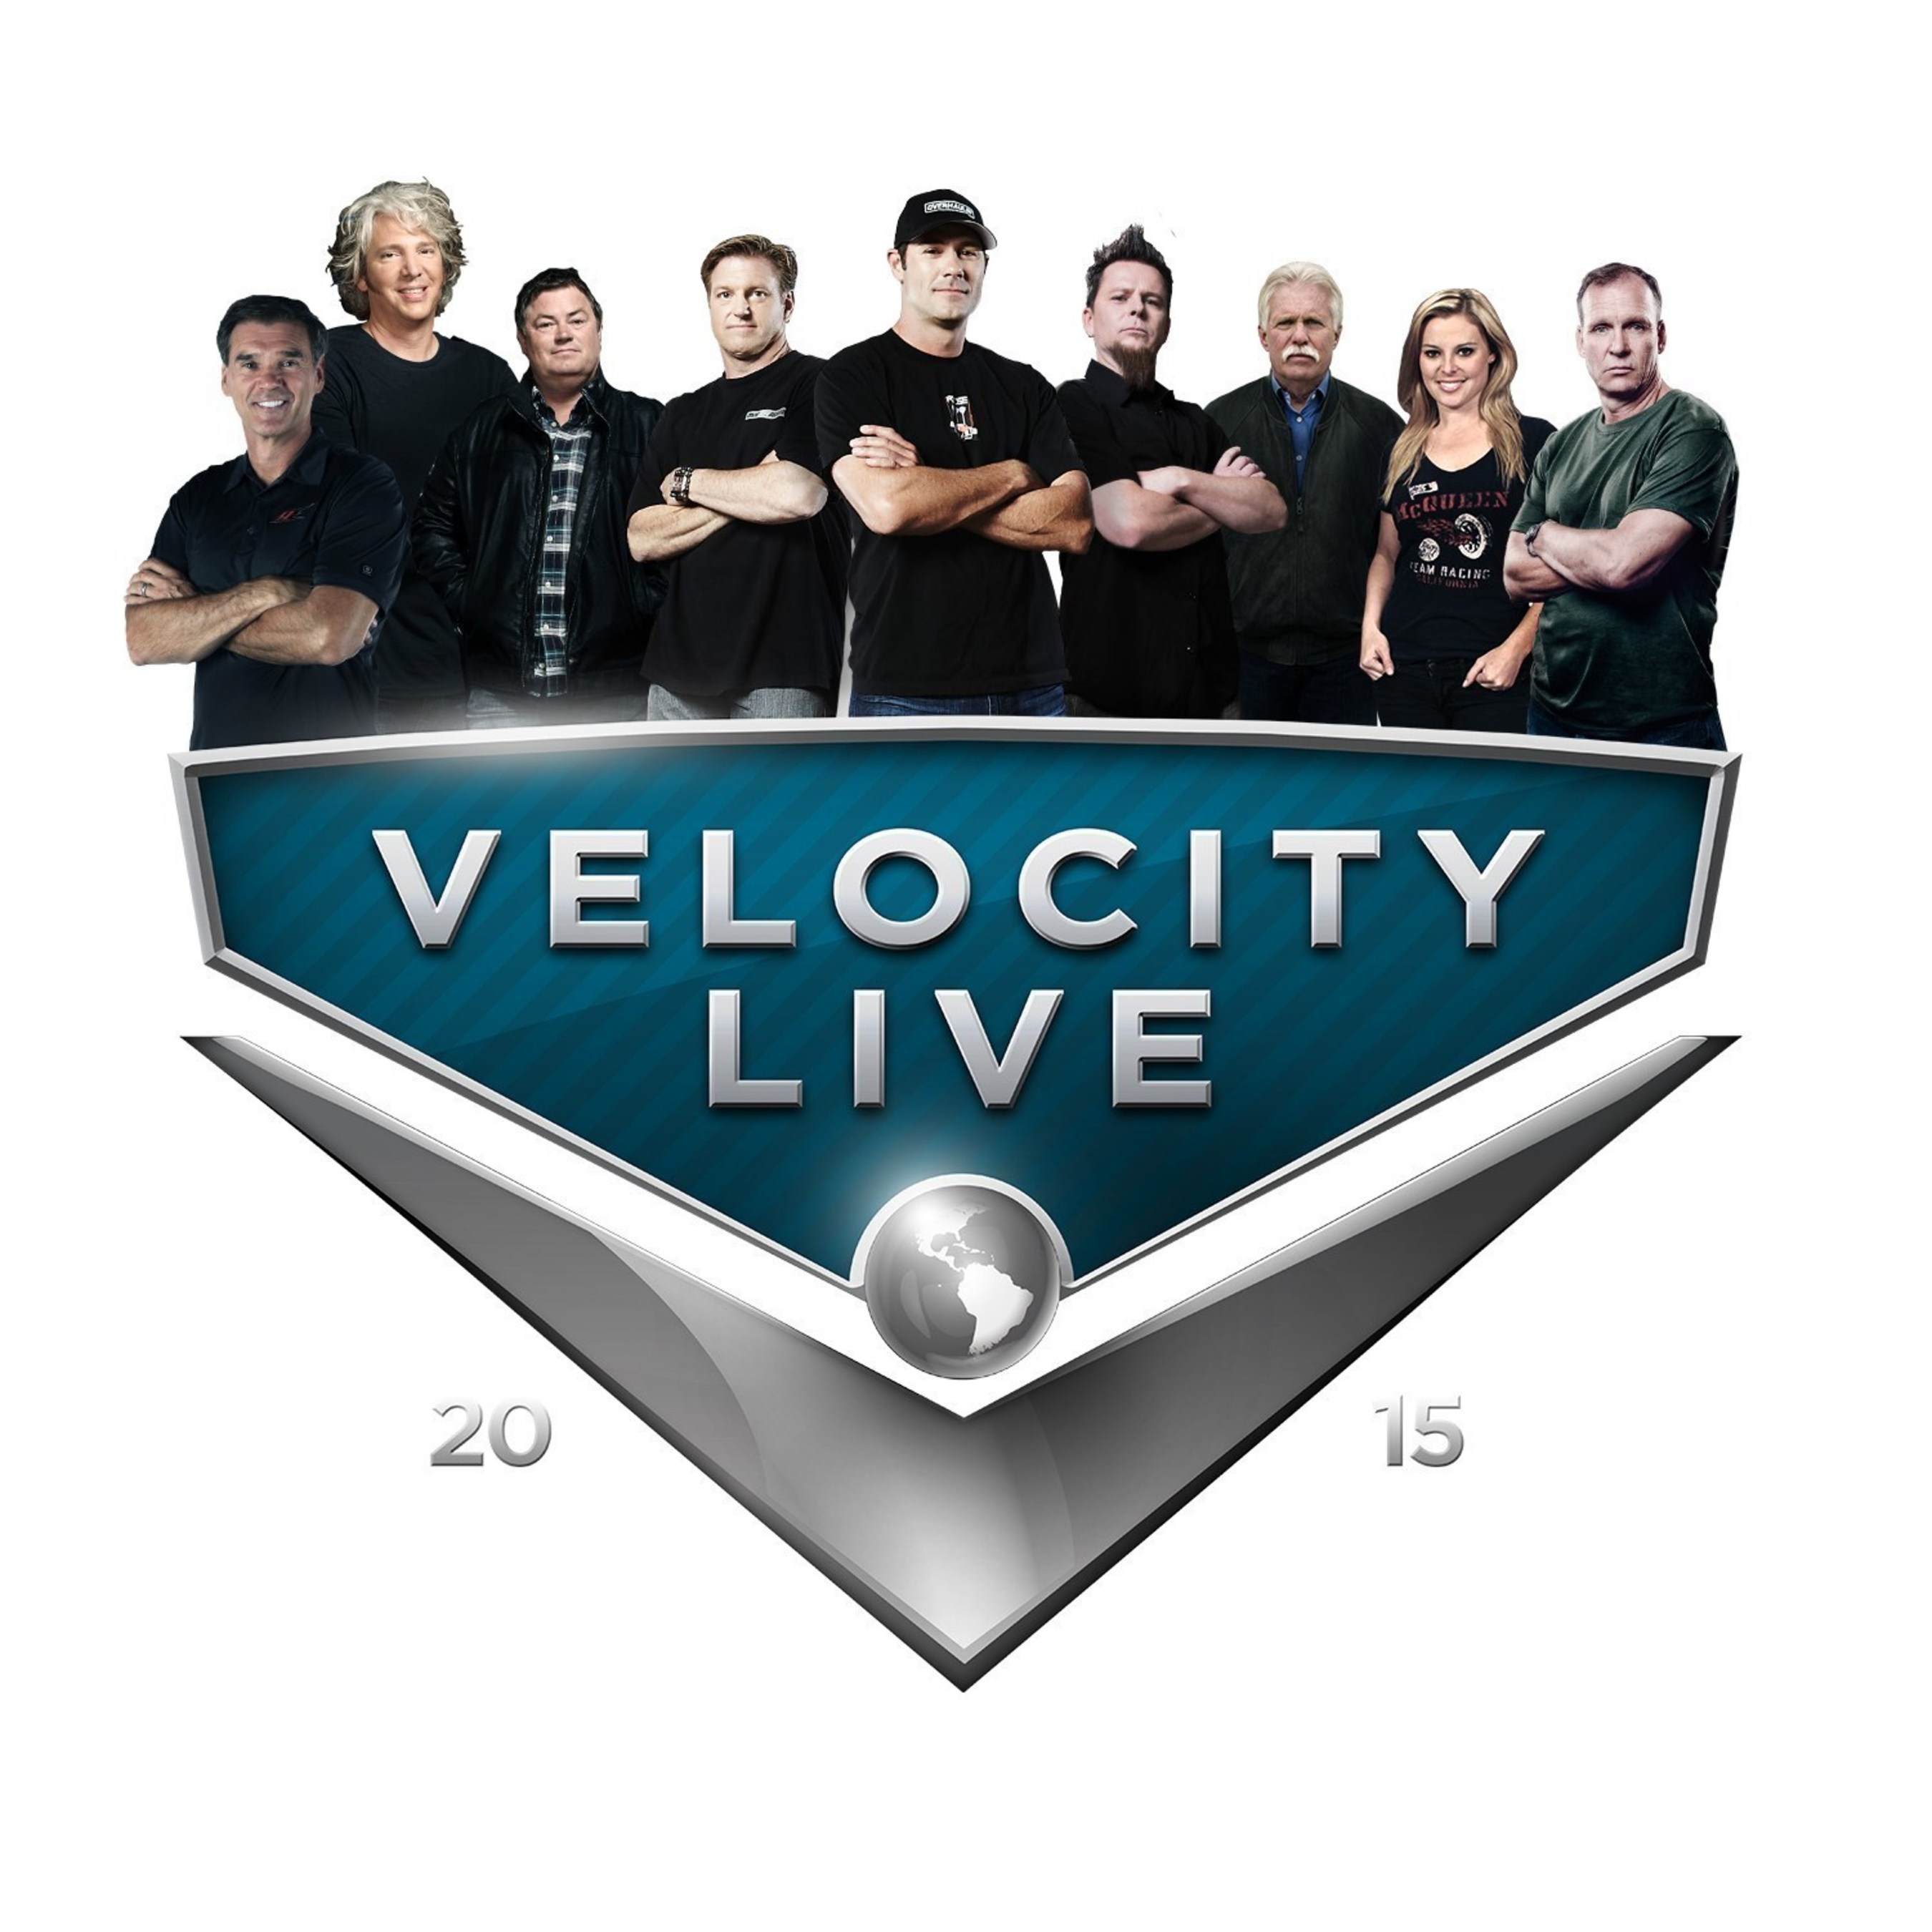 Velocity Live 2015 at the Westgate Resort & Casino Showroom in Las Vegas on Wednesday, November 4, 2015, at 4 PM PT. Tickets are free and available only to those with a SEMA Show badge. Get your tickets today by visiting velocitylive2015.com.